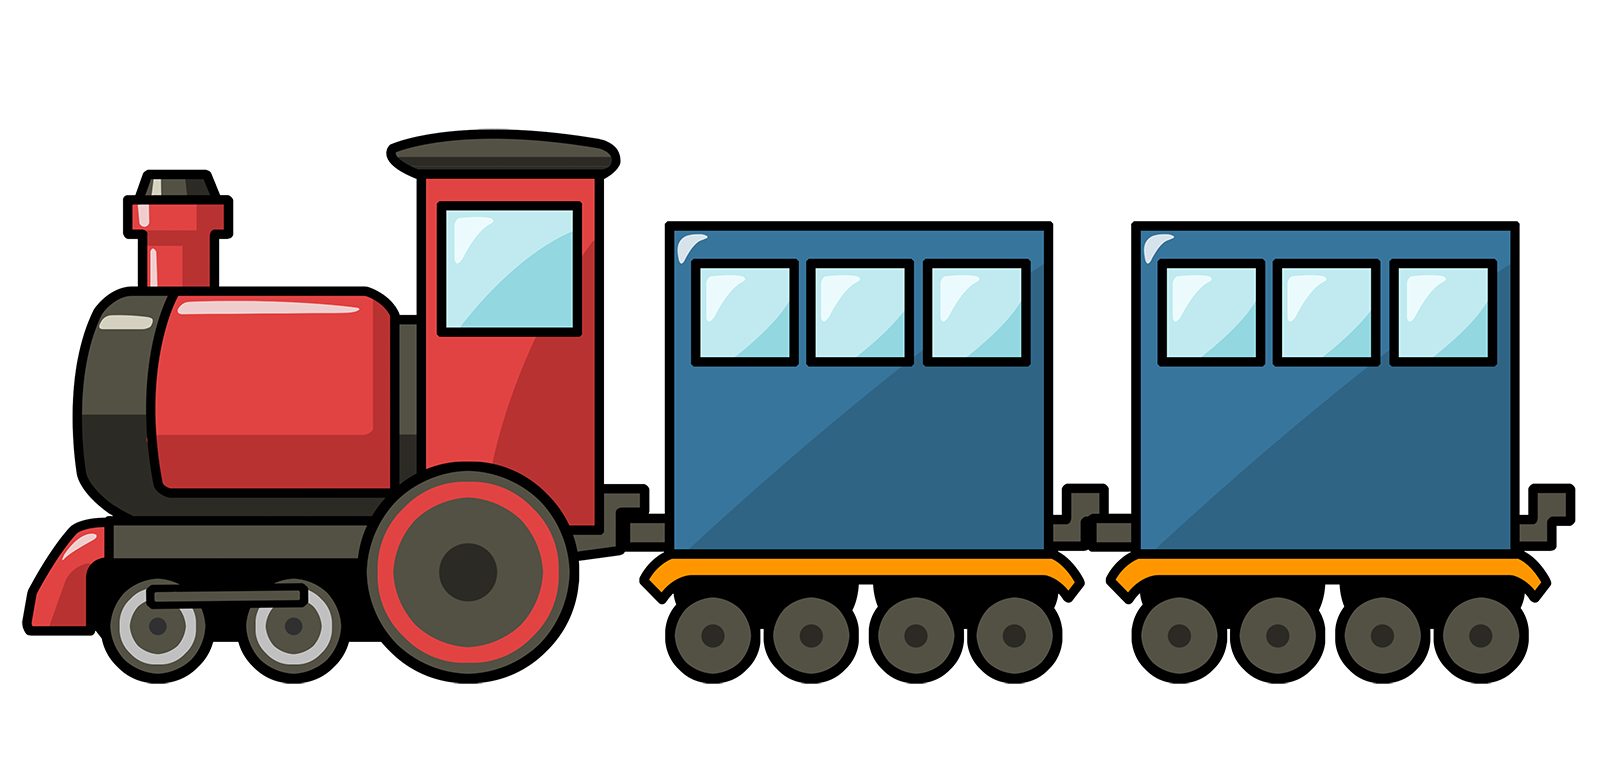 1000  images about Cartoon Tr - Toy Train Clipart